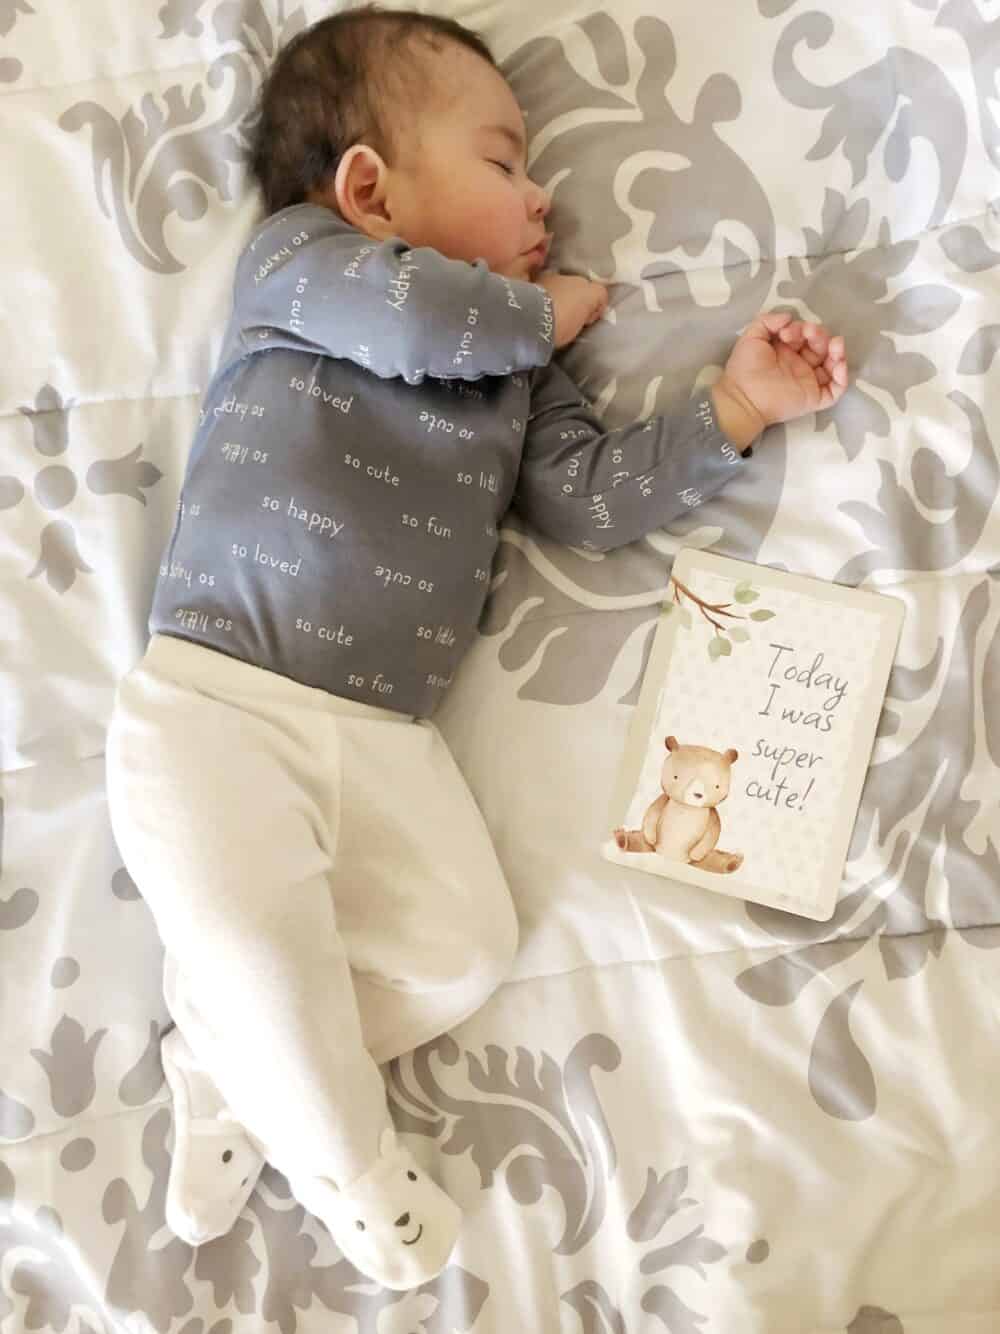 A baby sleeping on a bed next to a book.